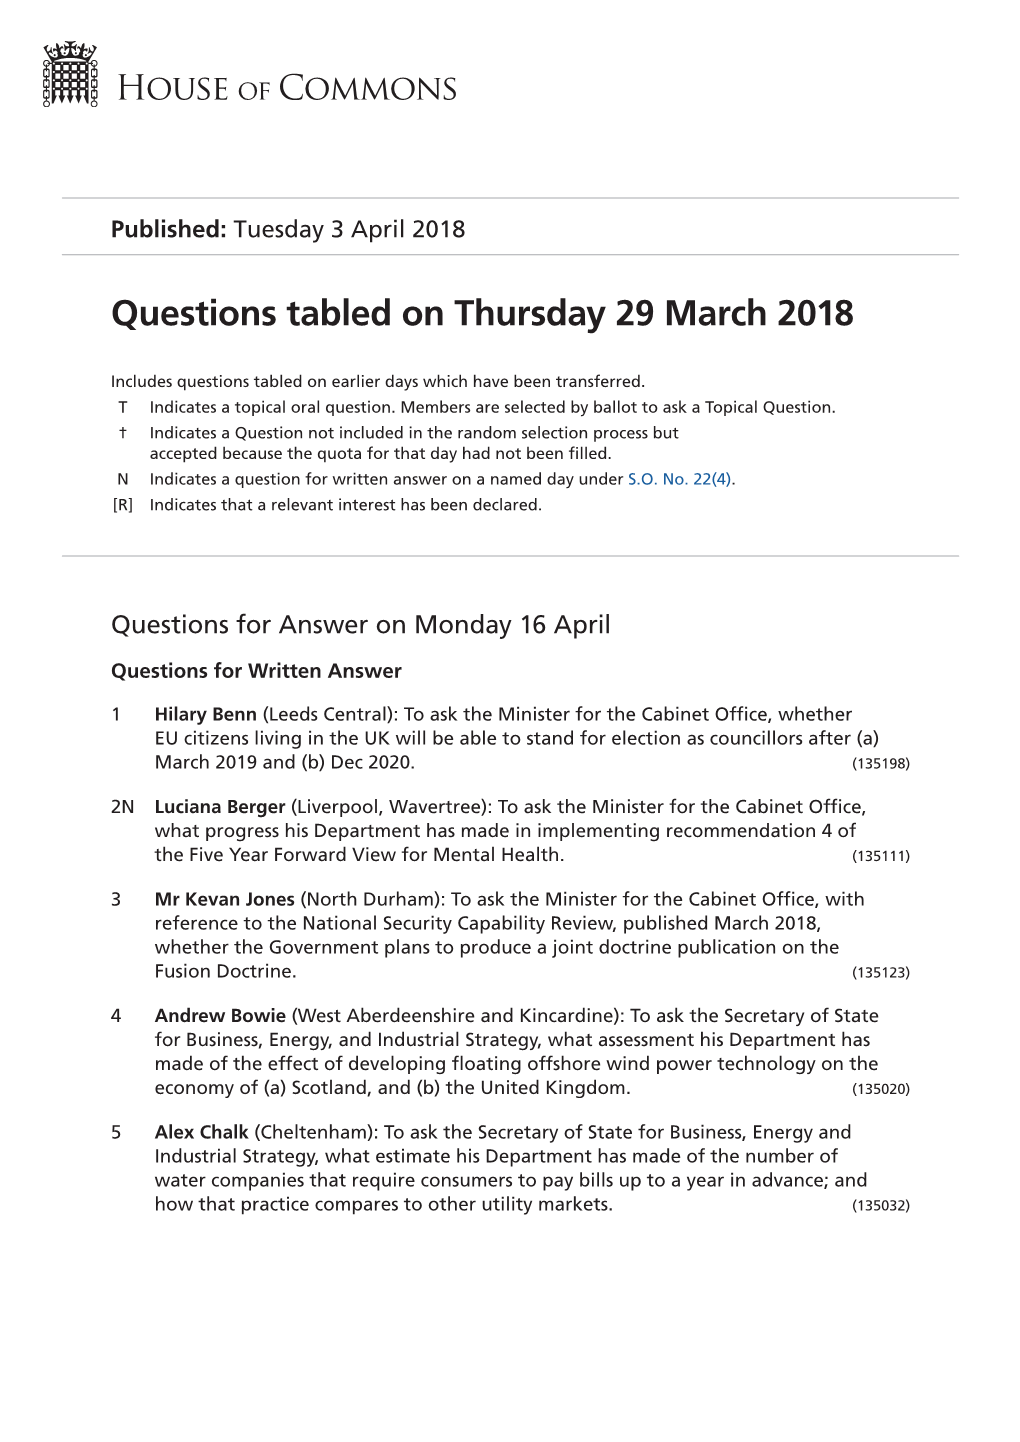 Questions Tabled on Thu 29 Mar 2018